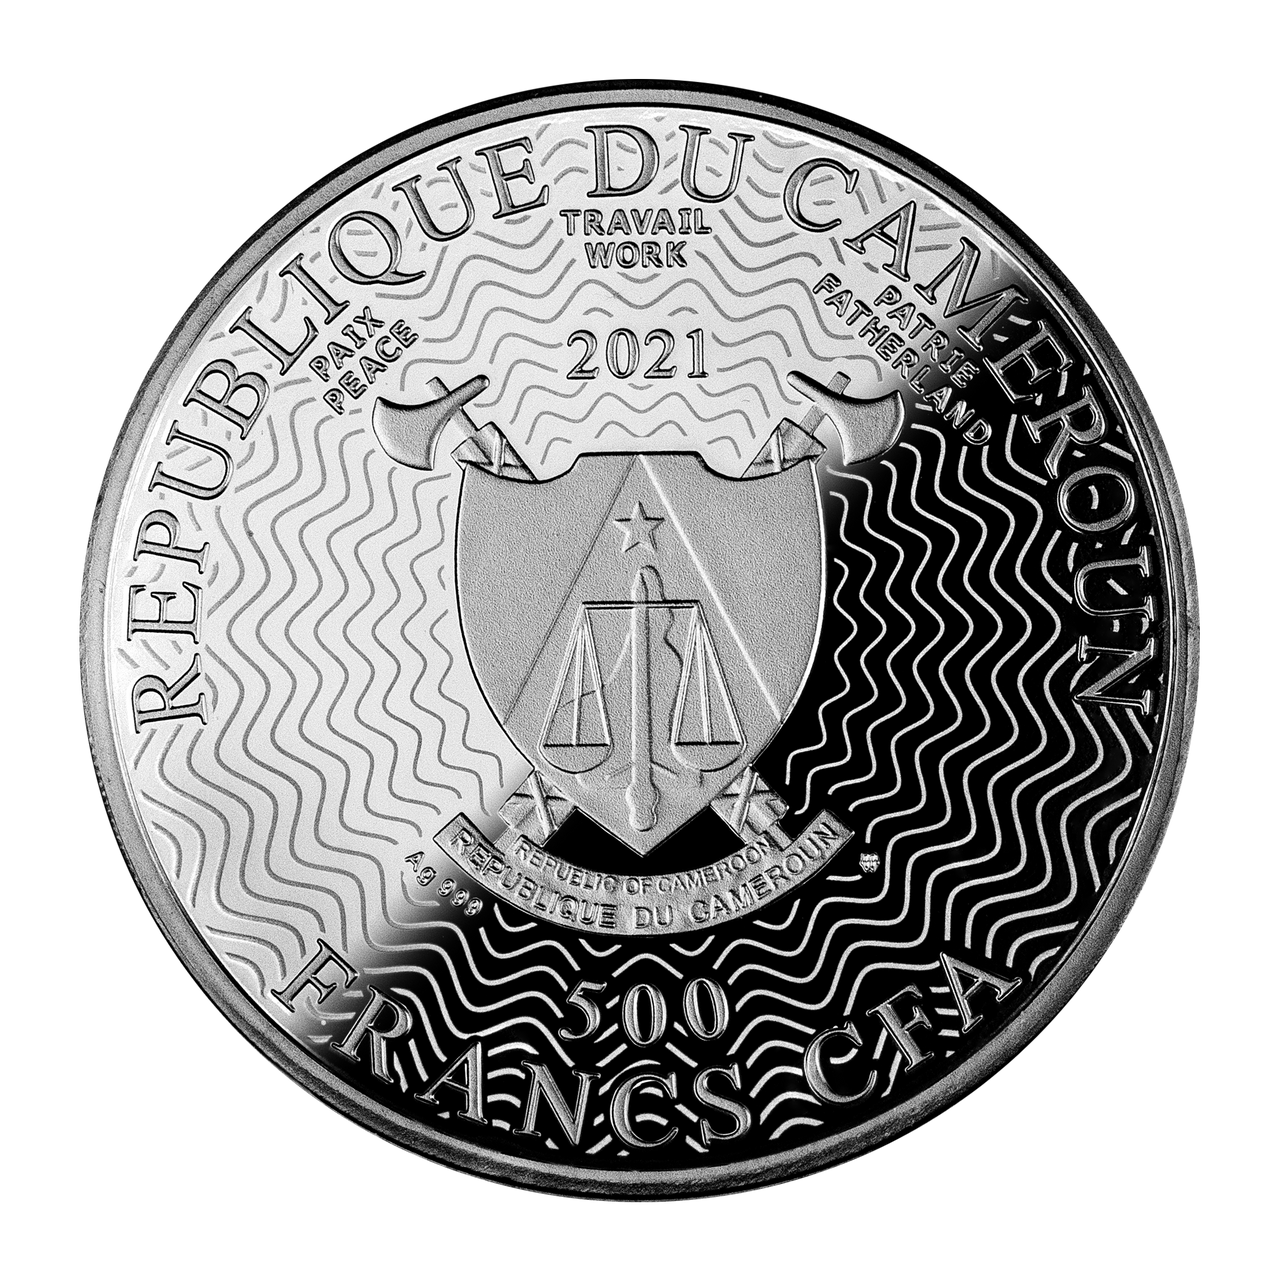 2021 Cameroon 500 Francs Silver Ruthenium Coin - Solar System - Neptune